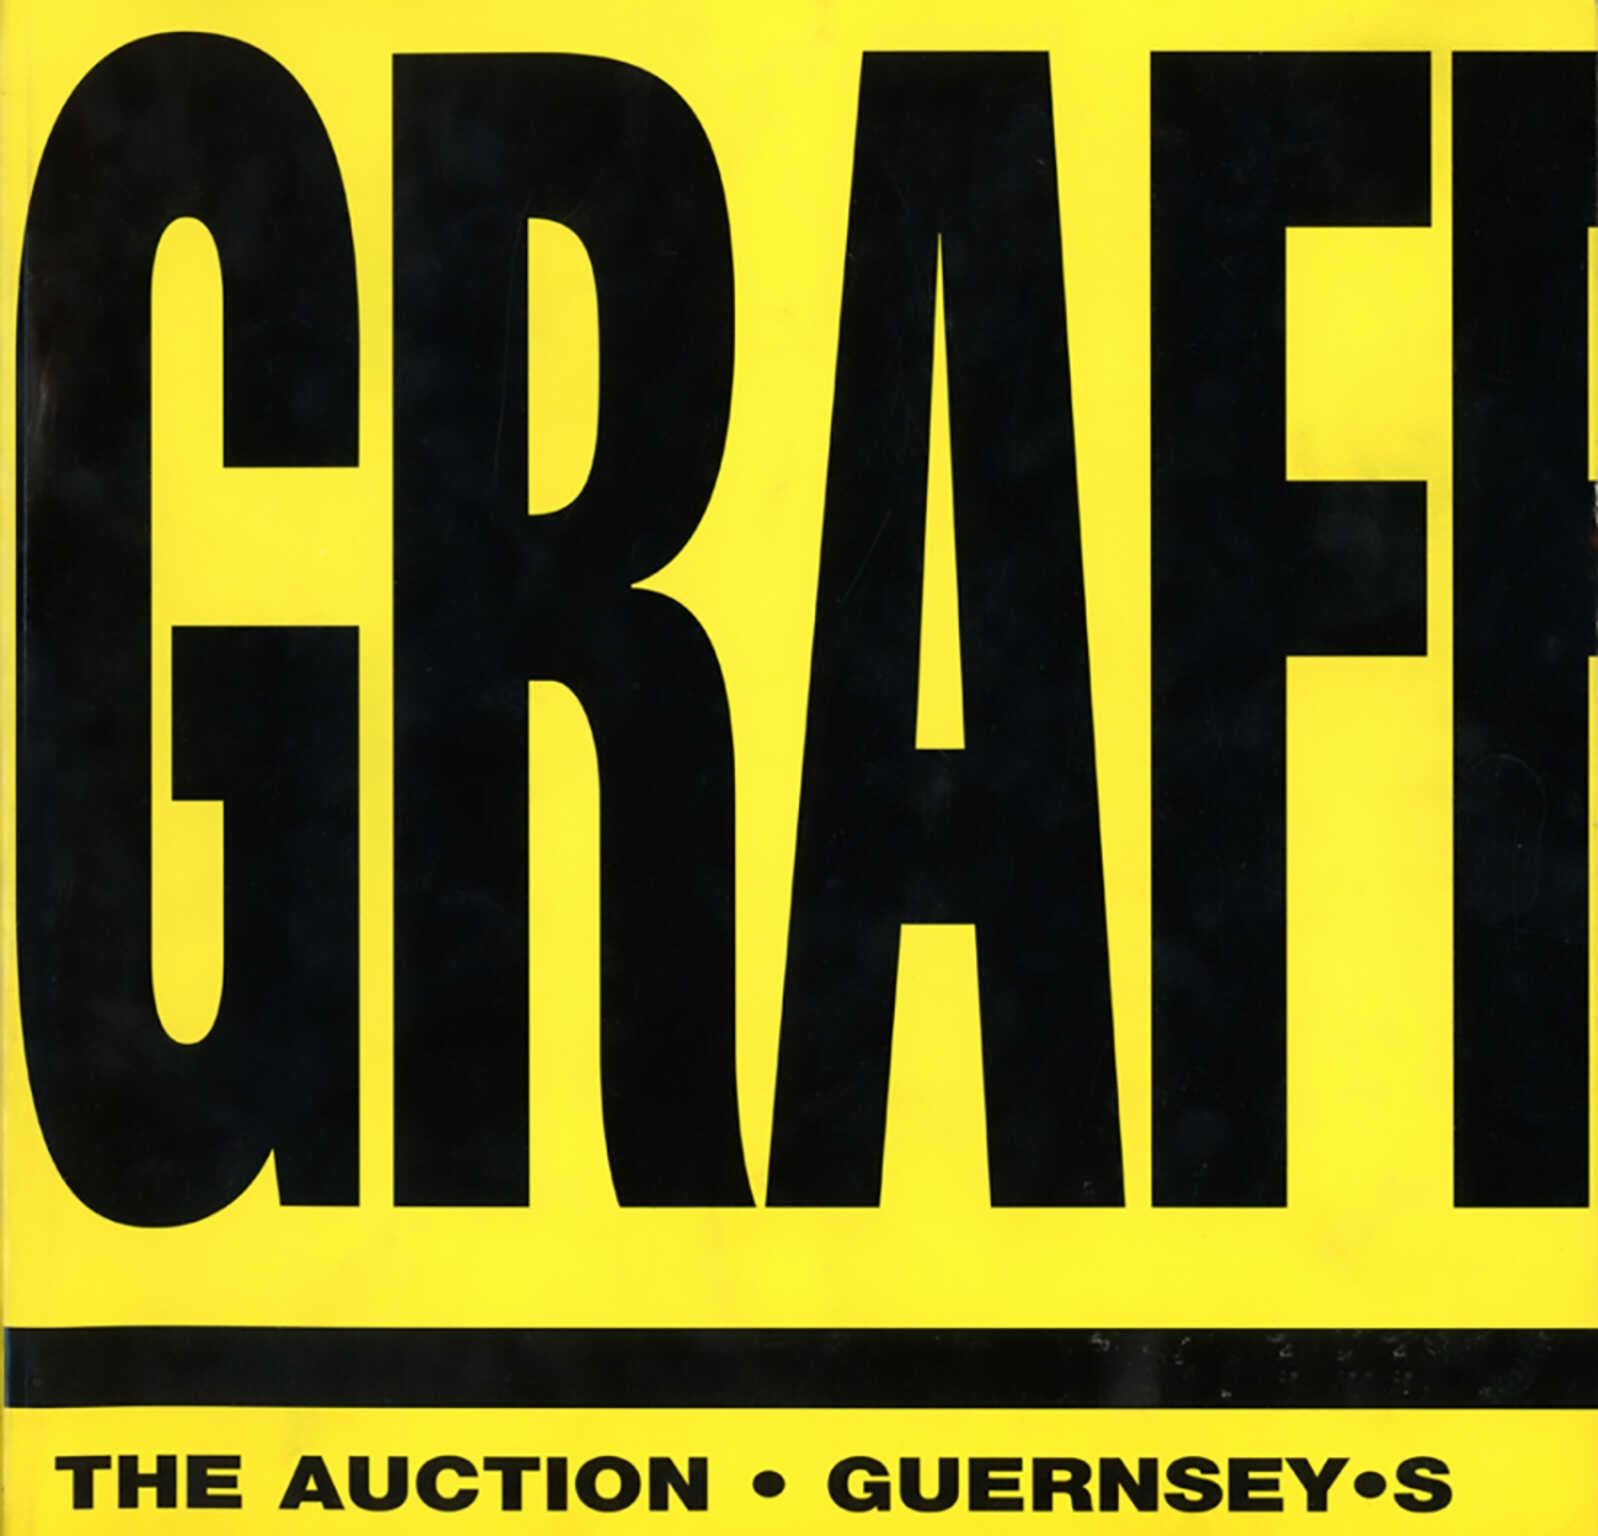 Guernsey's Graffiti Auction Catalog 2000 - Print by (after) Jean-Michel Basquiat